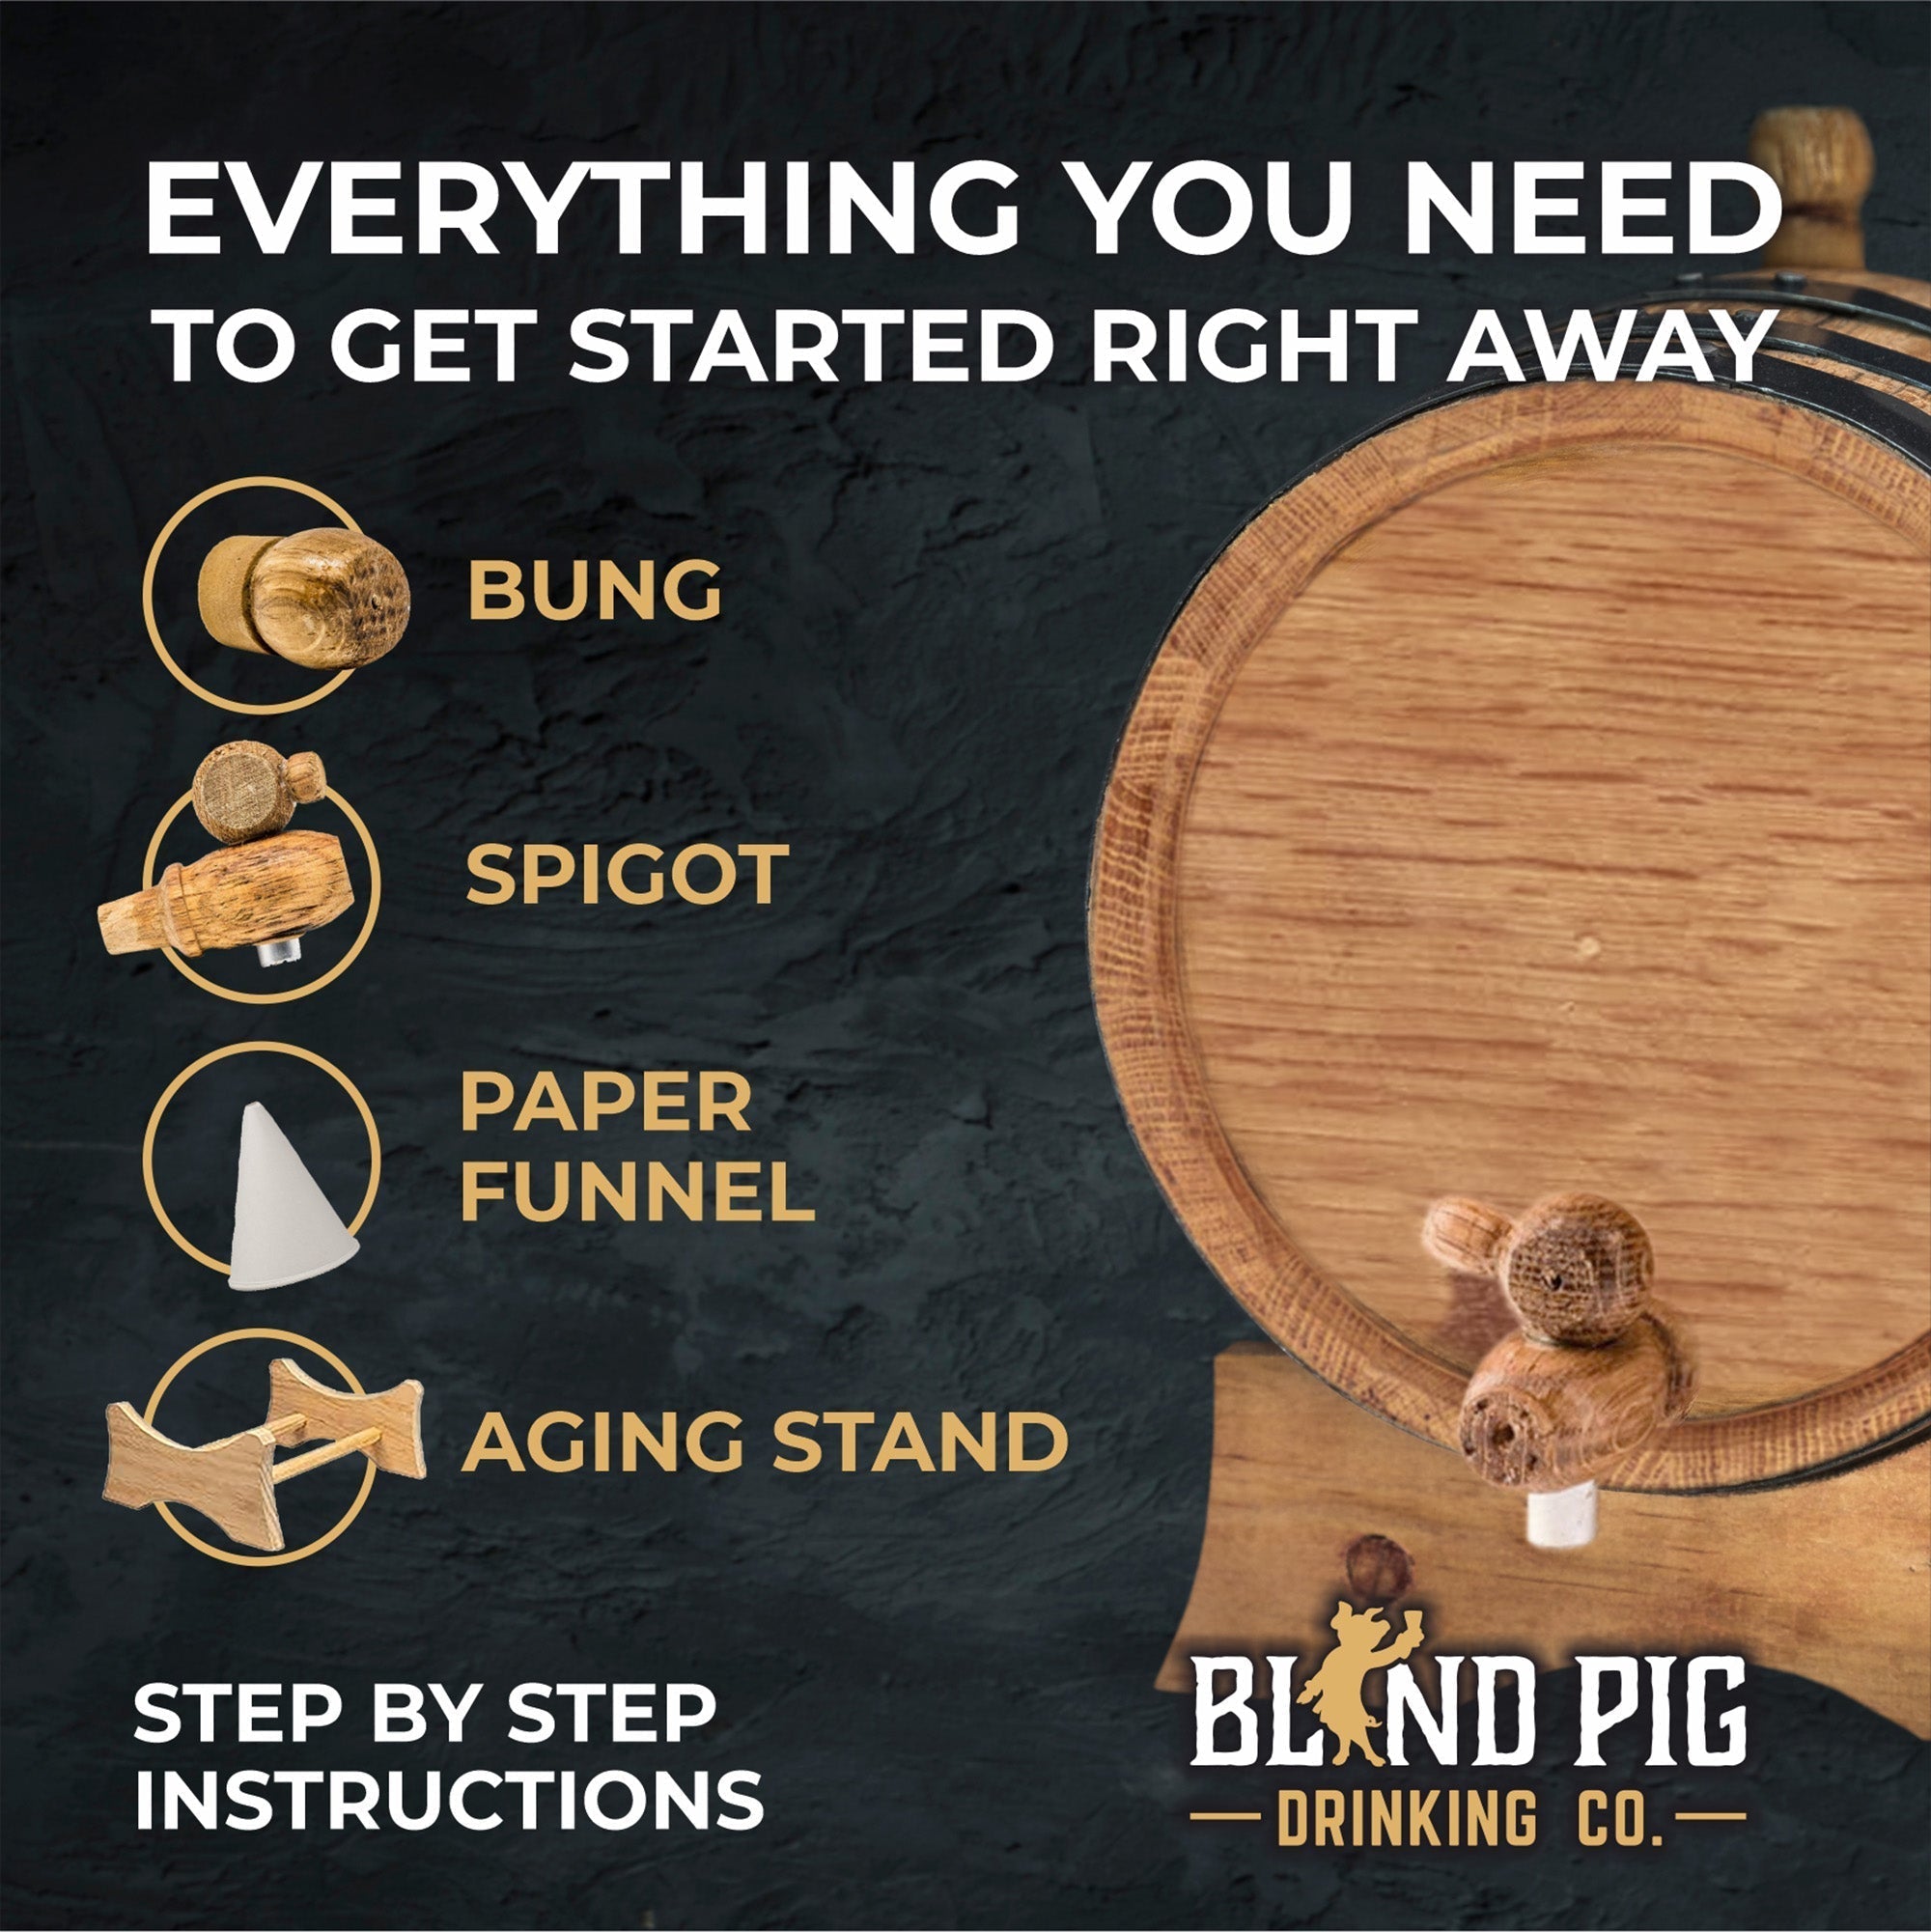 Personalized Tequila Barrel for Aging Tequila and Spirits | Distilling Co. Series - Blind Pig Drinking Co.